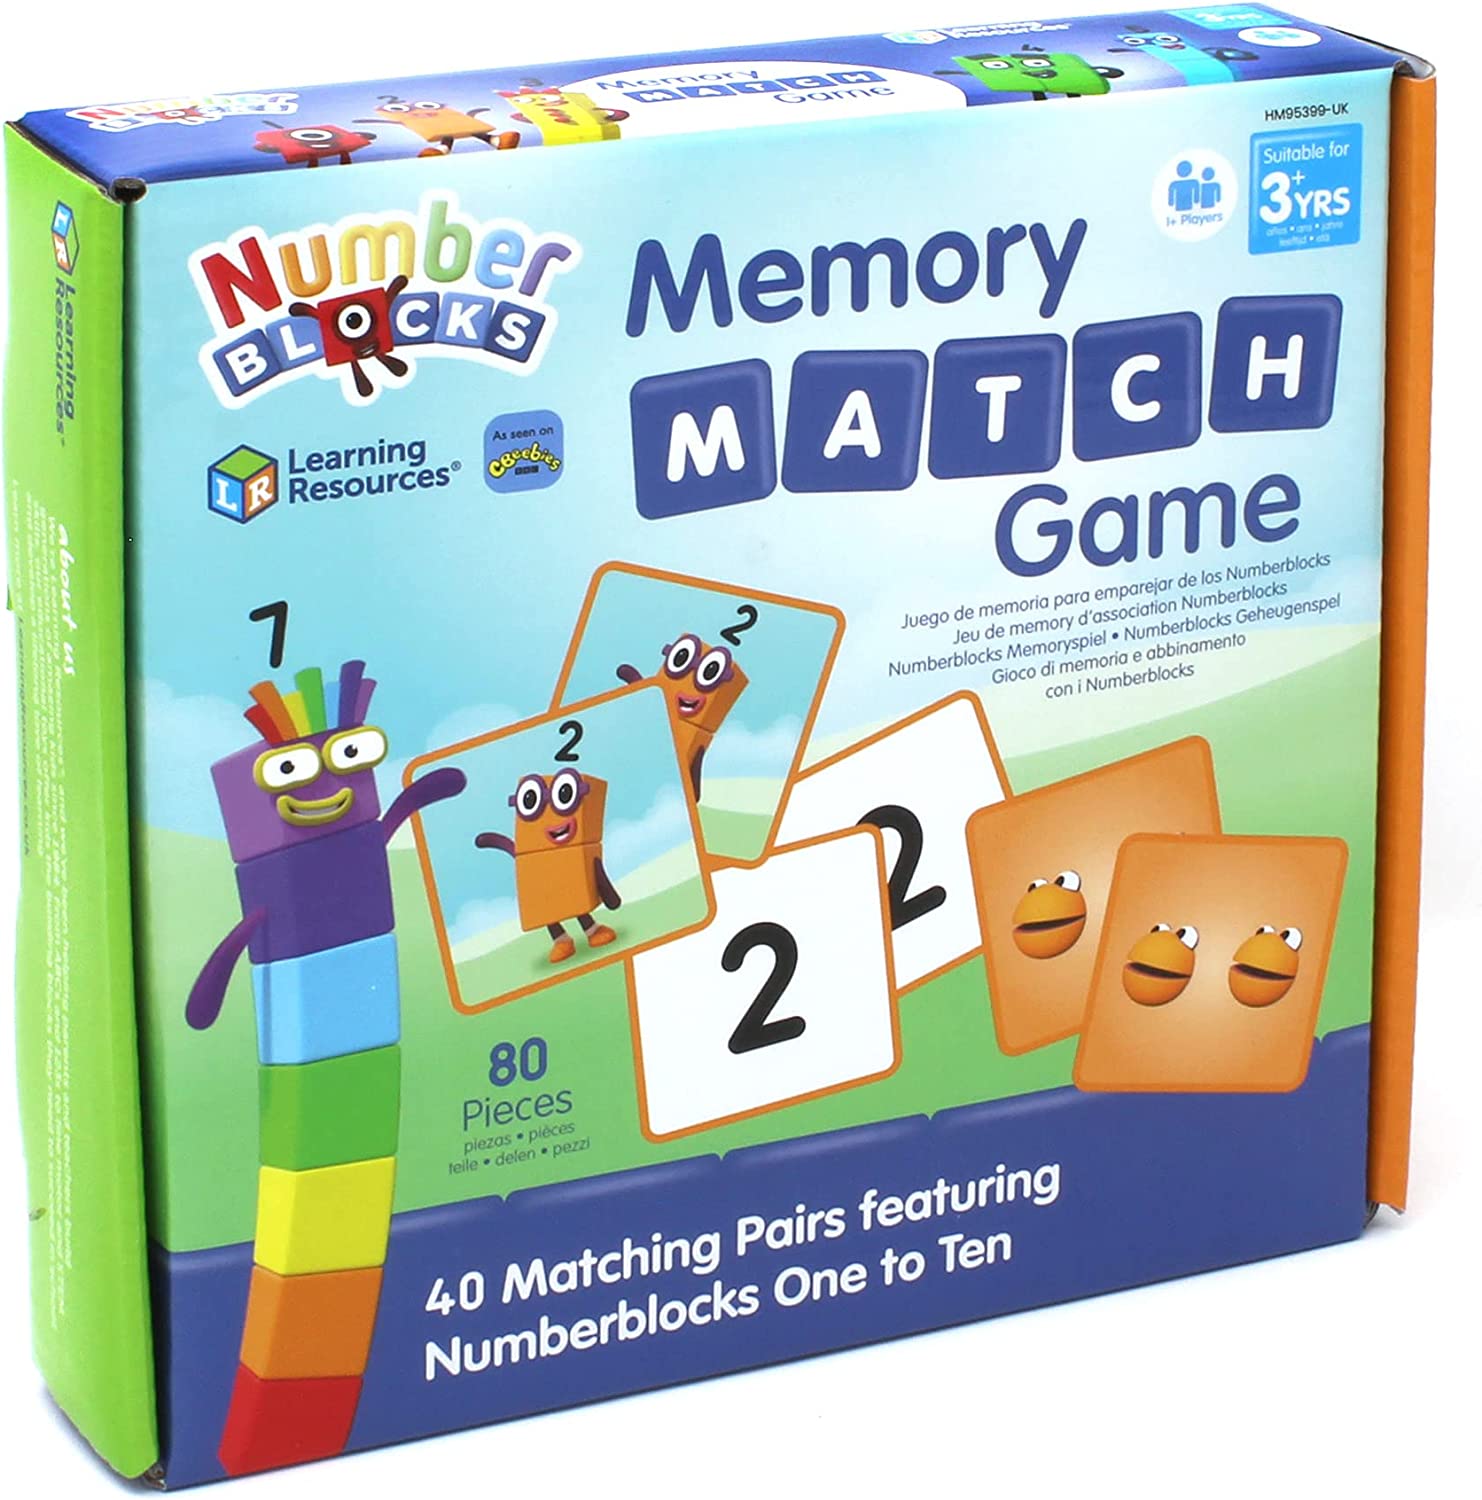 Numberblocks Memory Match Game, Children will have lots of fun finding and pairing with this engaging Numberblocks game inspired by the hit CBeebies TV series. There are four ways to match - by Numberblocks One to Ten, Numberblobs, Number Fun, and Numberlings. The sturdy, full colour cards are designed for little hands and have colour-coded borders for easy game set-up. Includes 80 cards. Suitable for one or more players. Flip over the cards to help the Numberblocks friends find their perfect matches with t